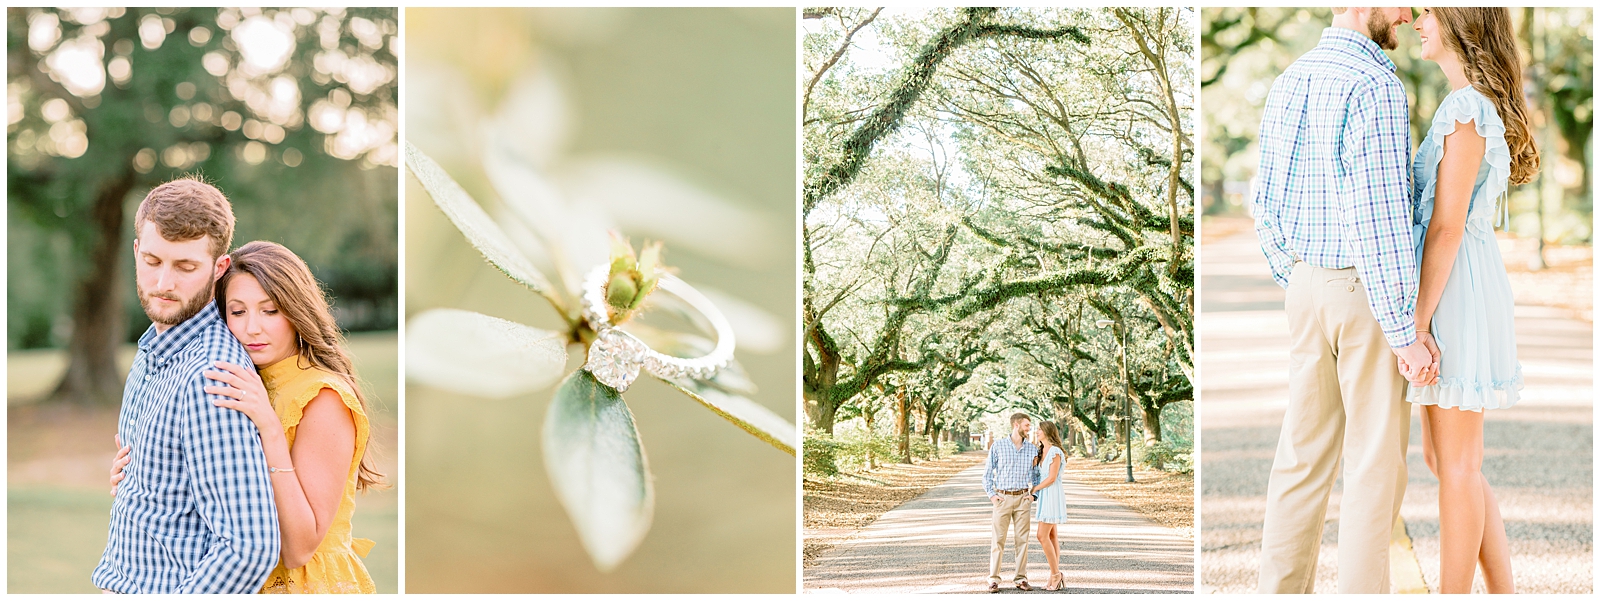 springhill college engagement session. engagement ring. goldendoodle in photos.